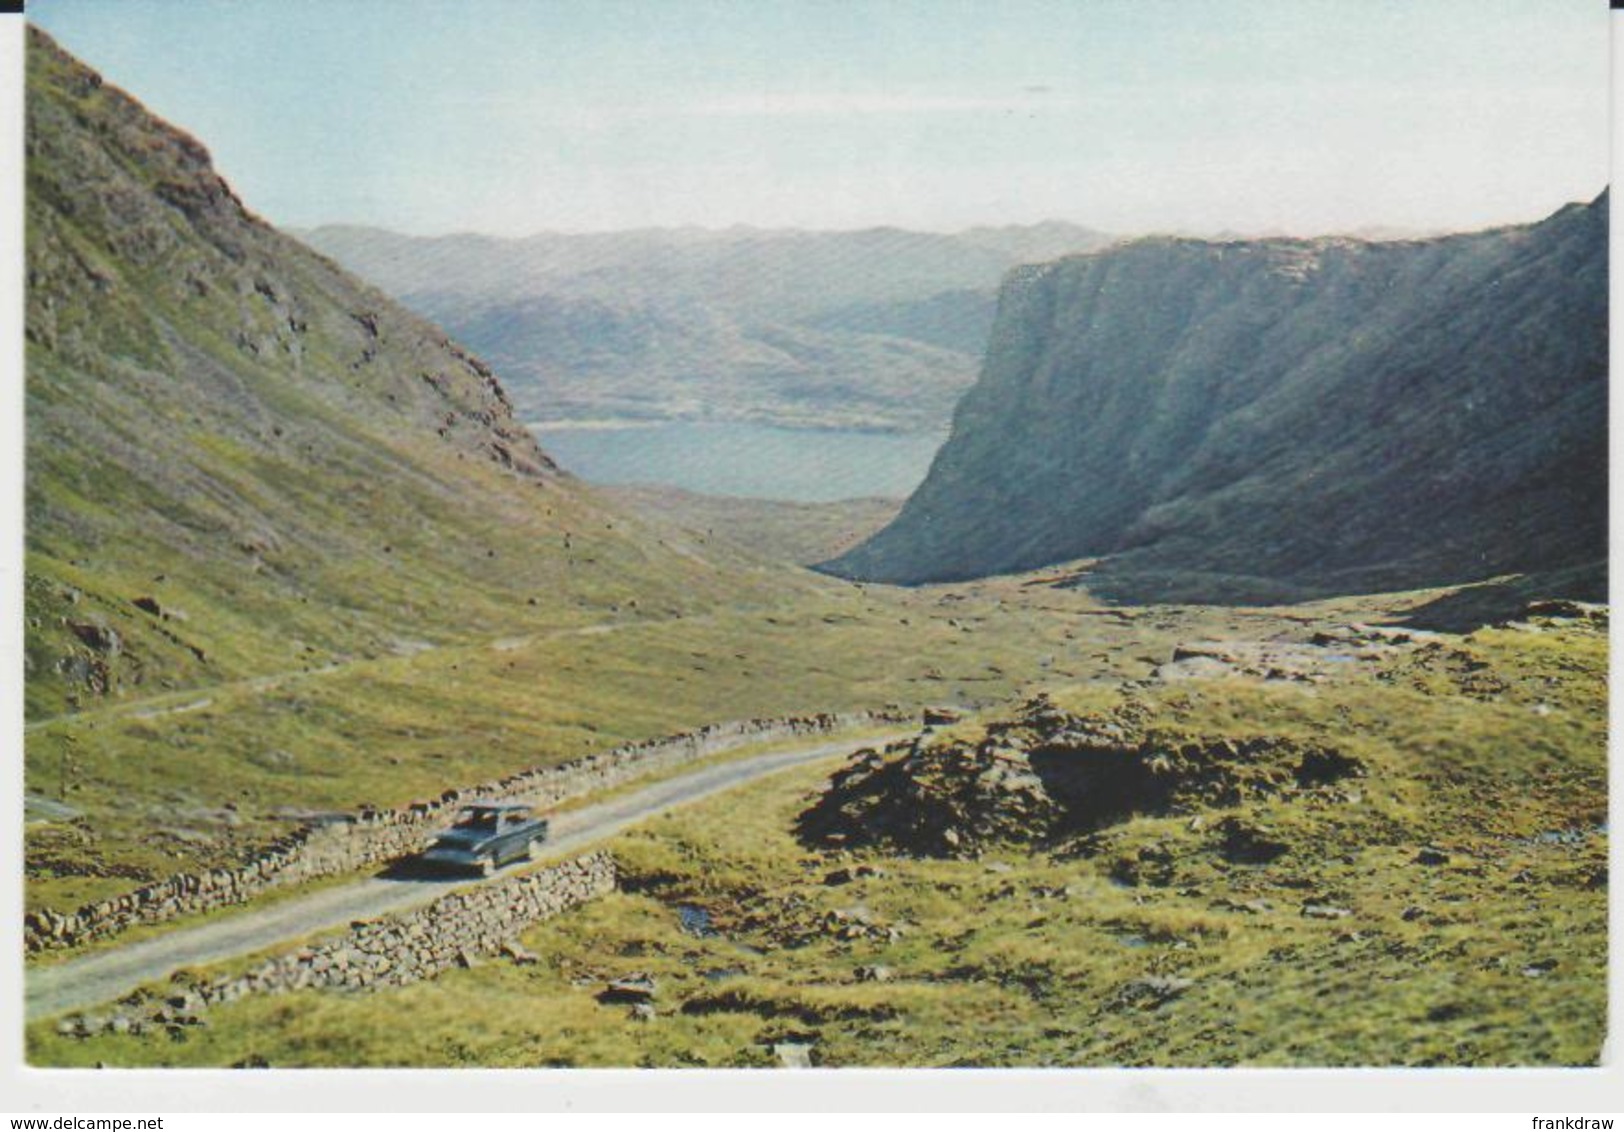 Postcard - The Applecross Road And Loch Kishorn, Ross - Shire Card No..4416  - Unused Very Good - Unclassified